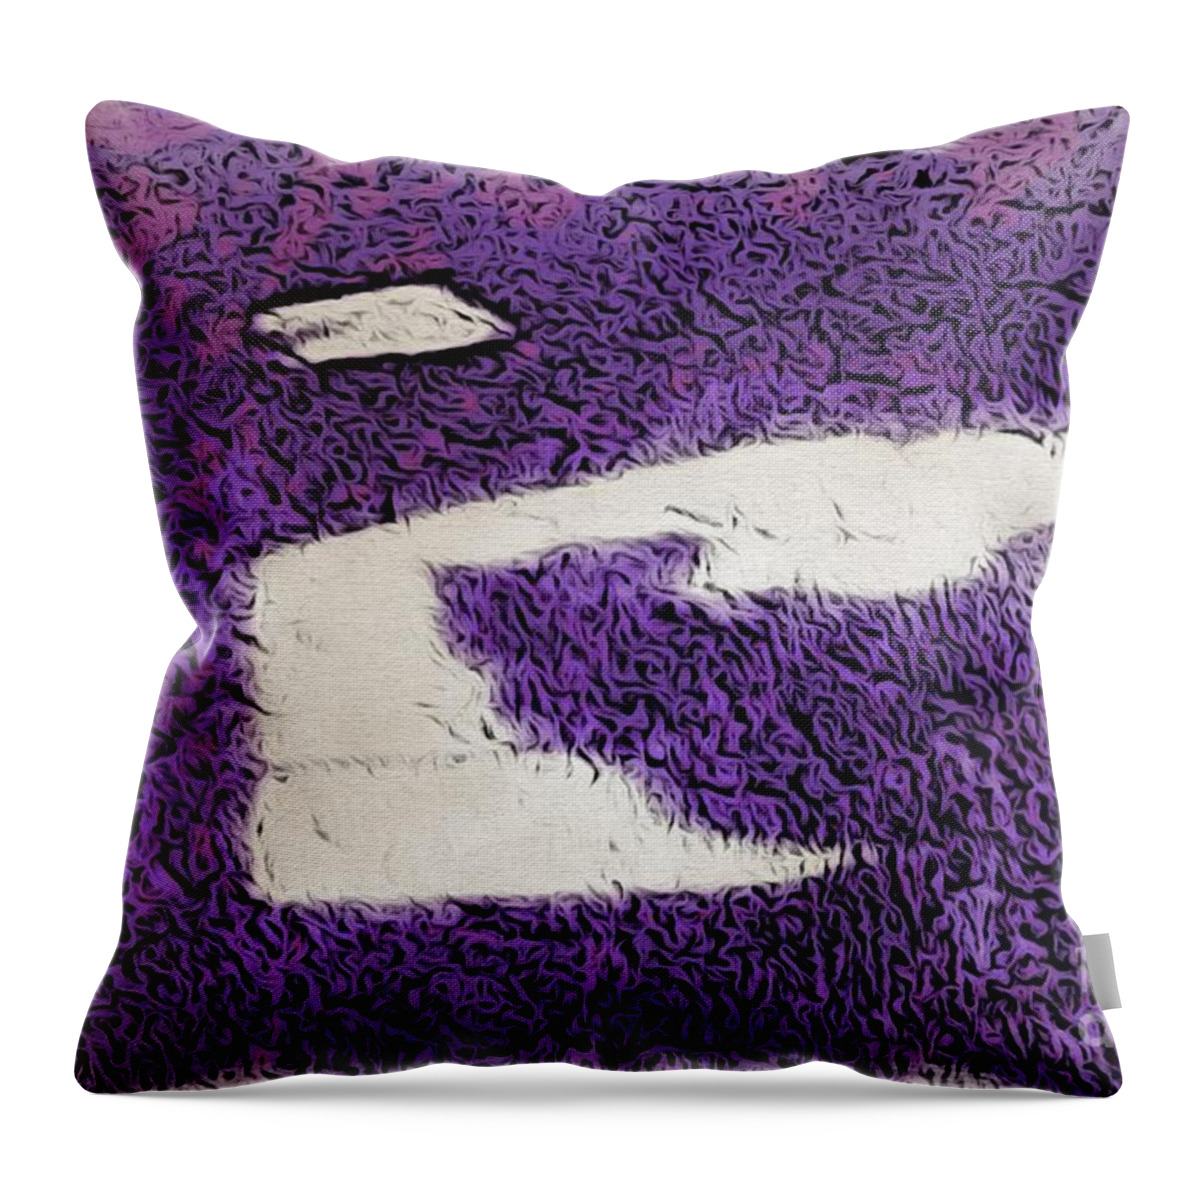 Kitty In The Window Throw Pillow featuring the photograph Purple Kitty Image Abstract by Phyllis Kaltenbach